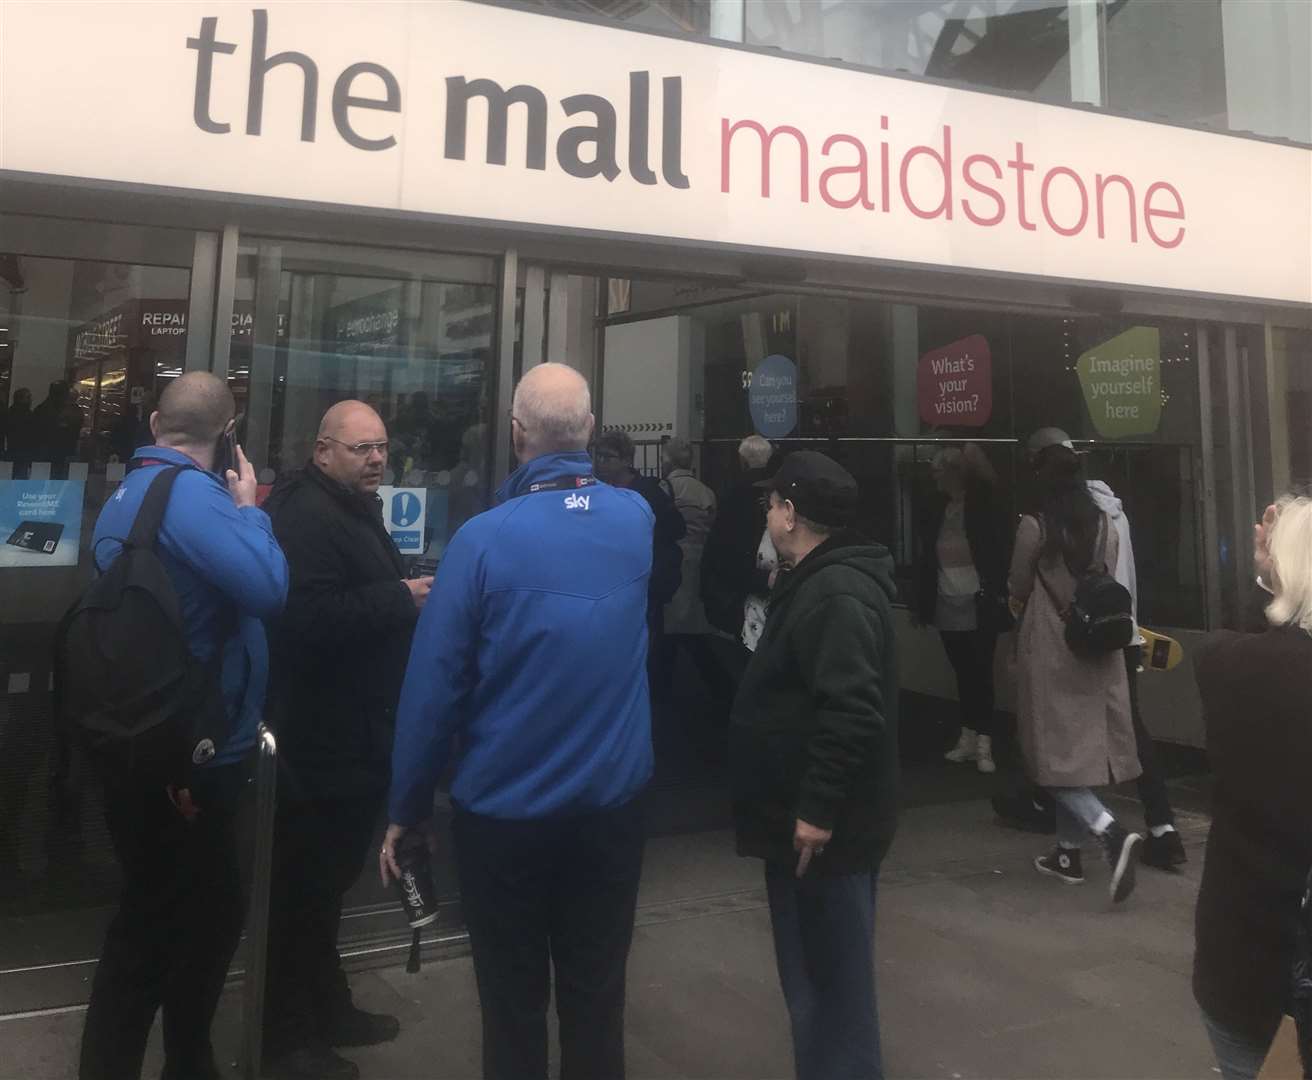 The Mall in Maidstone has been evacuated